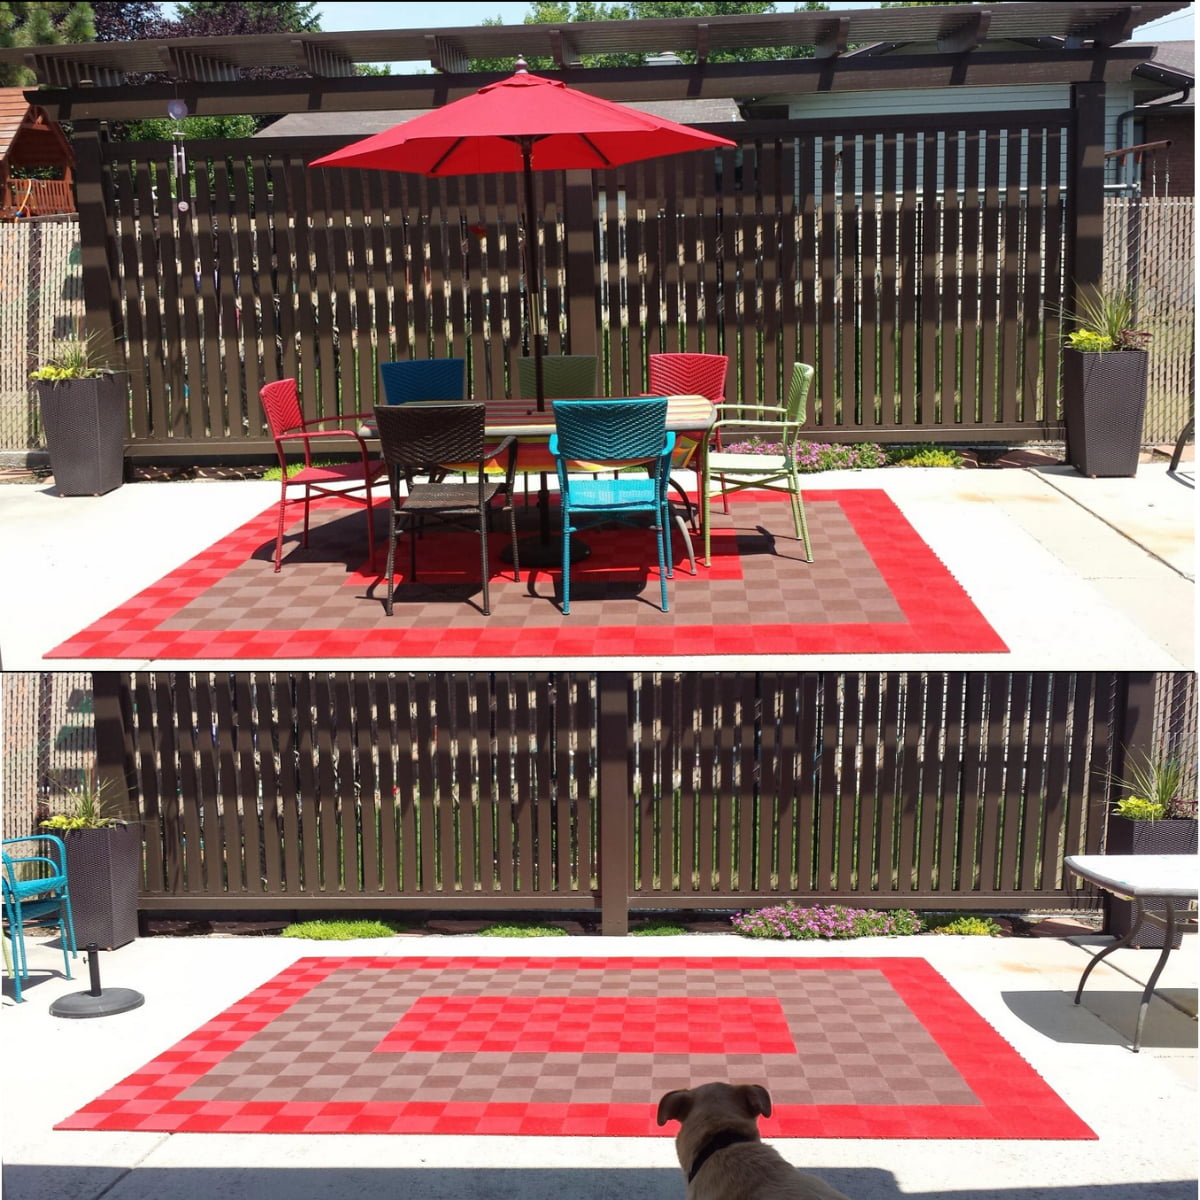 Patio Tile mat with perforated brown and red.